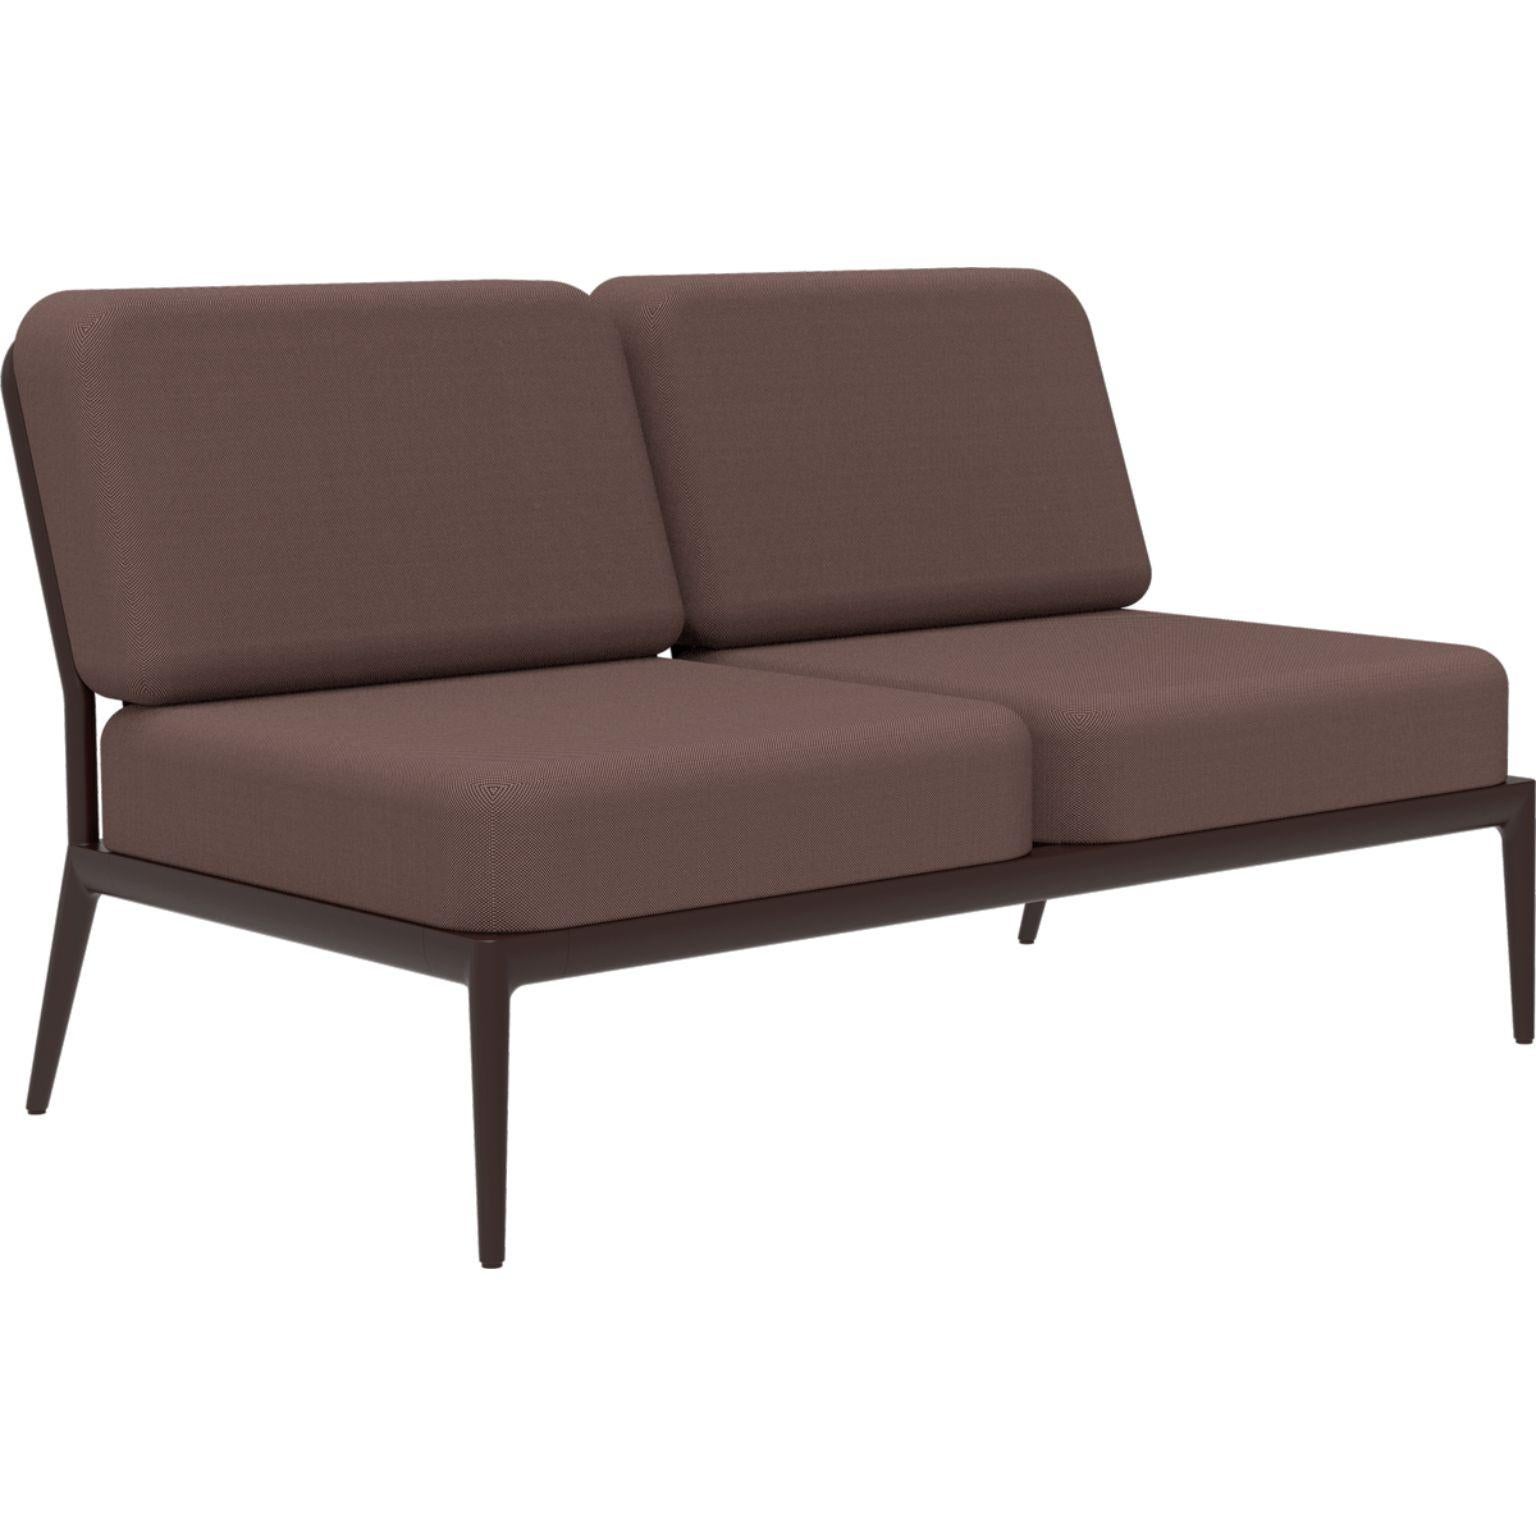 Ribbons Chocolate Double Central Modular sofa by MOWEE
Dimensions: D83 x W136 x H81 cm
Material: Aluminum, and upholstery.
Weight: 27 kg.
Also available in different colors and finishes. 

An unmistakable collection for its beauty and